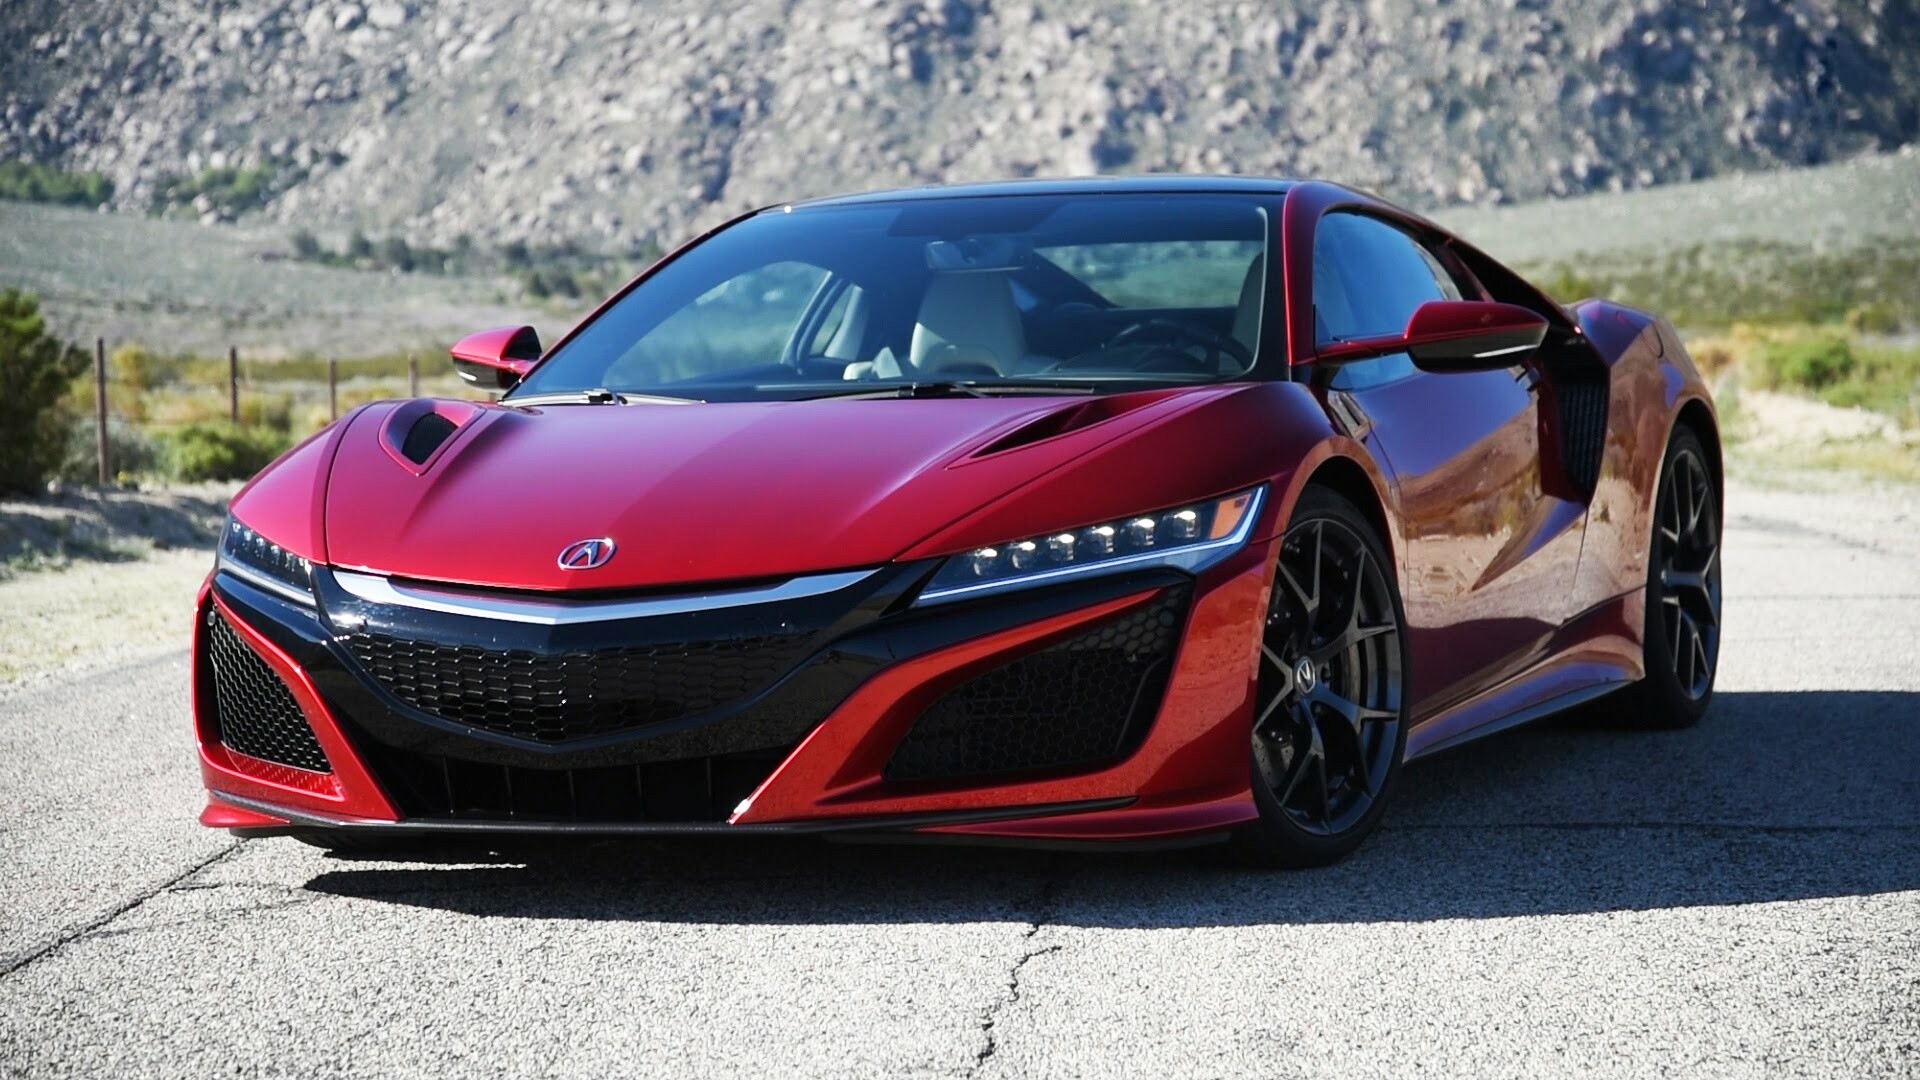 Acura NSX, Vehicles, HQ pictures, 2019, 1920x1080 Full HD Desktop